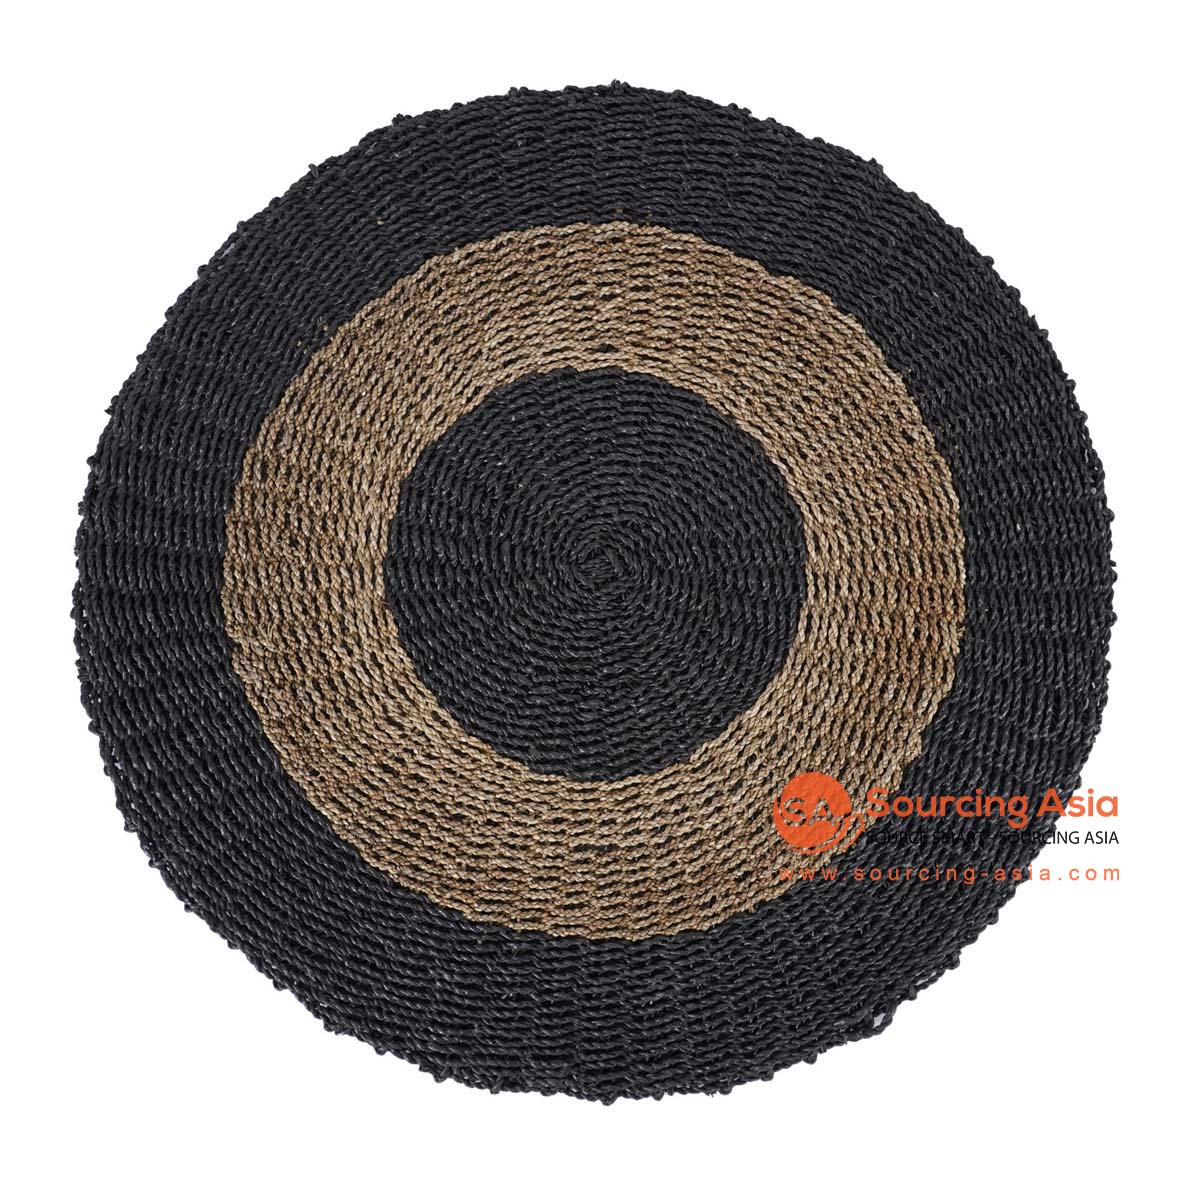 HBSC362 NATURAL SEAGRASS AND BLACK PLASTIC ROUND RUG